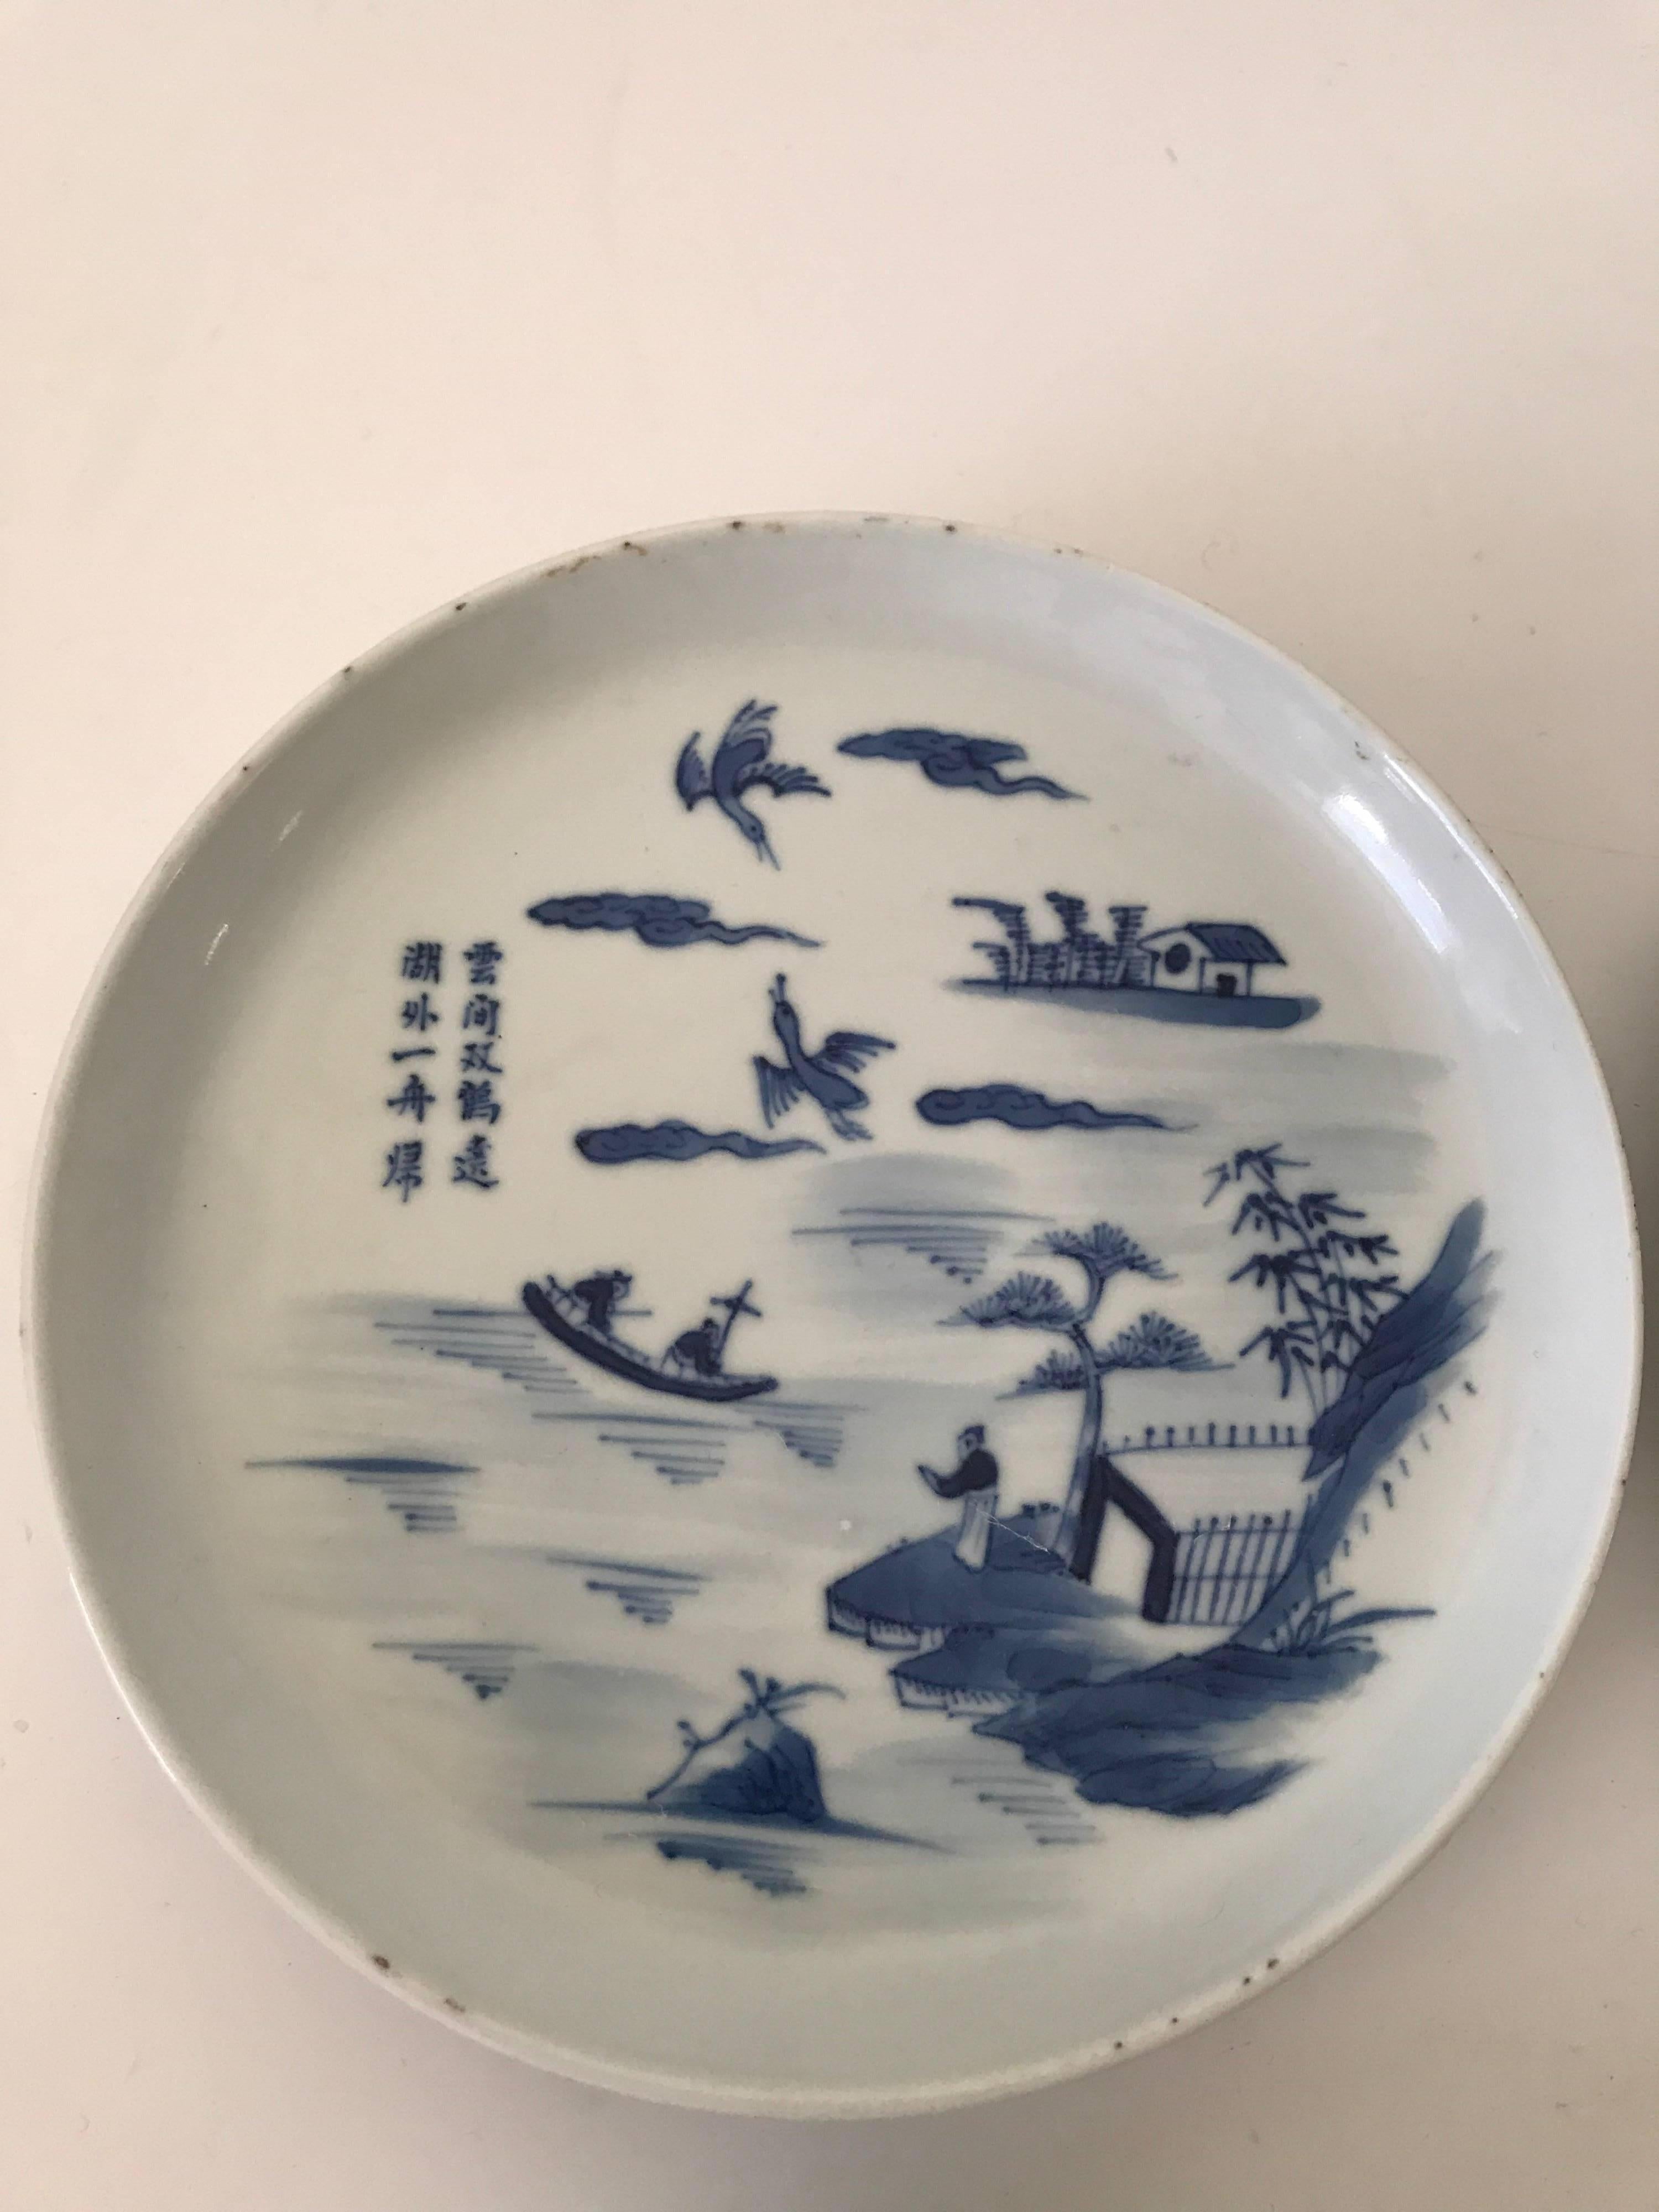 Rare six Chinese blue and white poem dishes 18th century.
Six very rare dishes with beautiful poems and nice painting, made during the 18th century. These type of dishes were most likely made for the Vietnamese market and there for the high court,